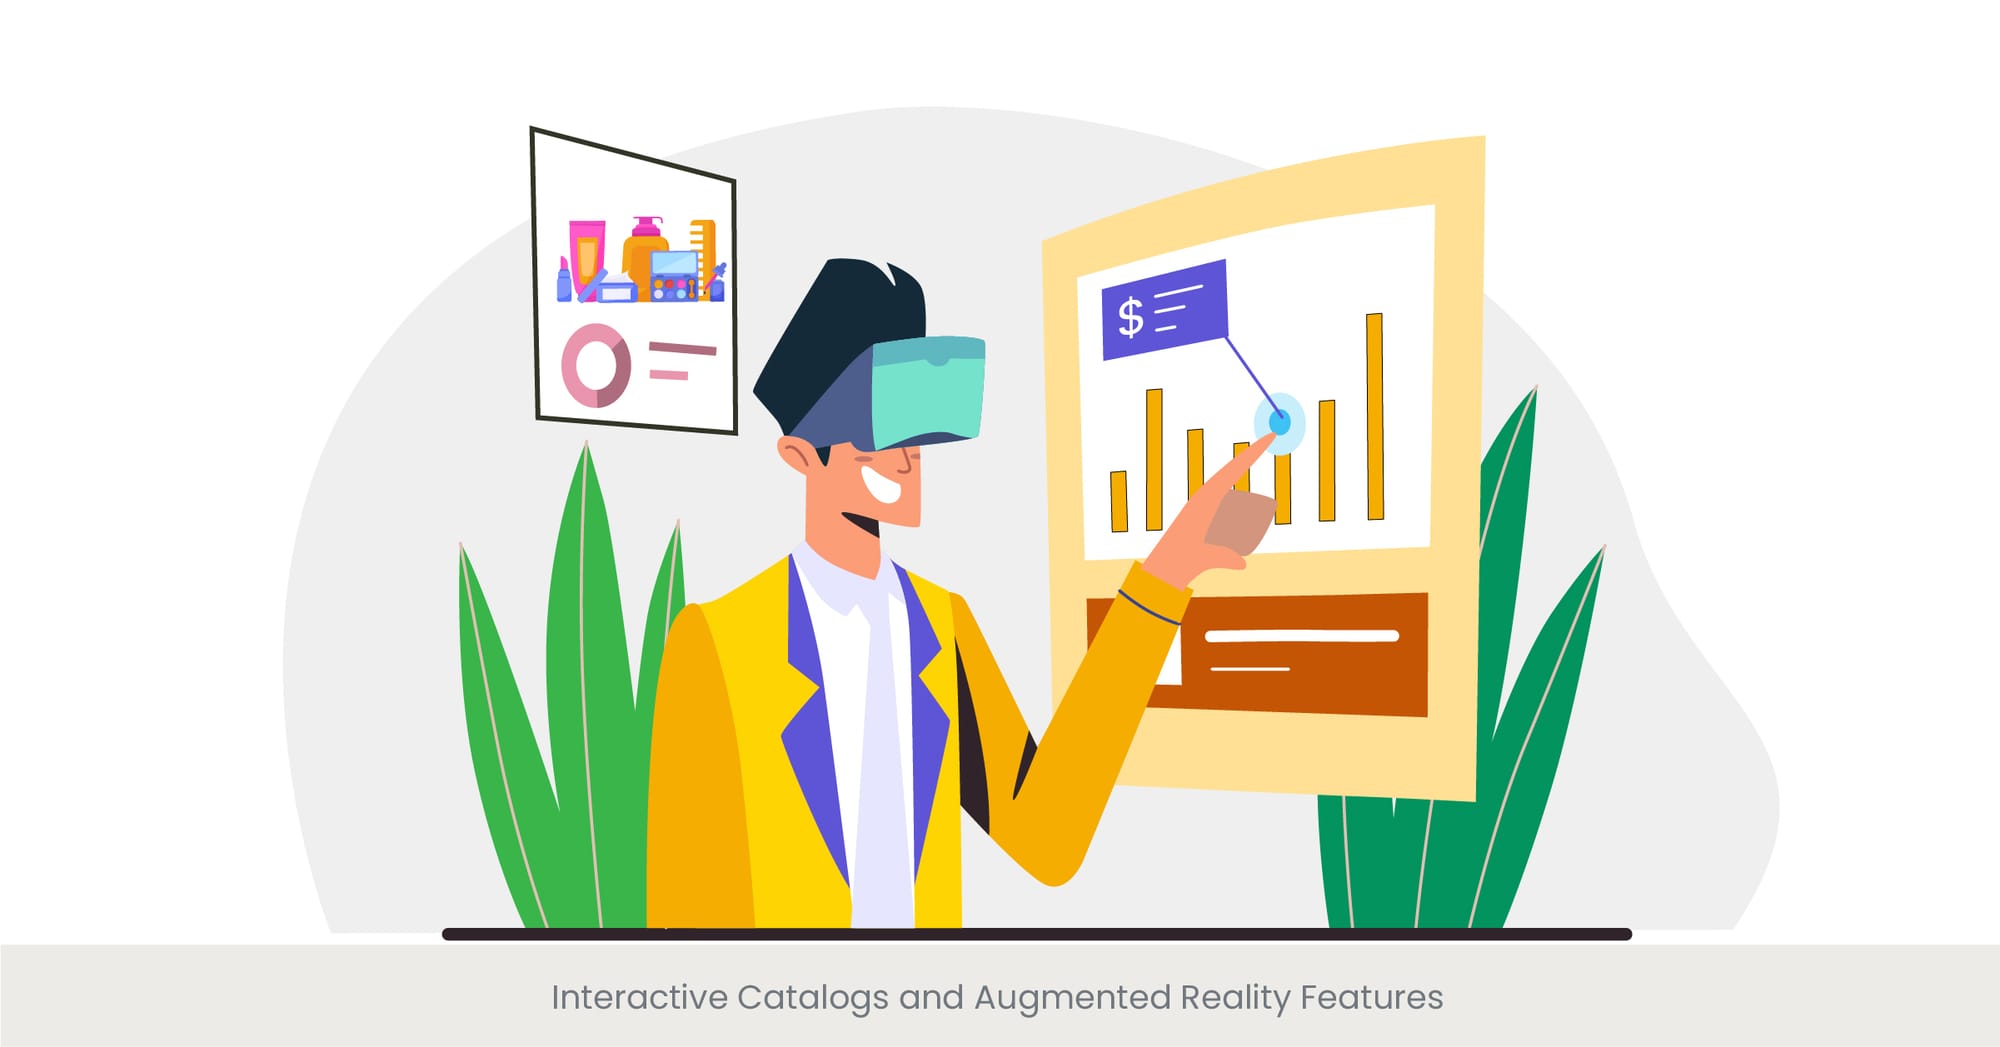 Interactive Catalogs and Augmented Reality Features